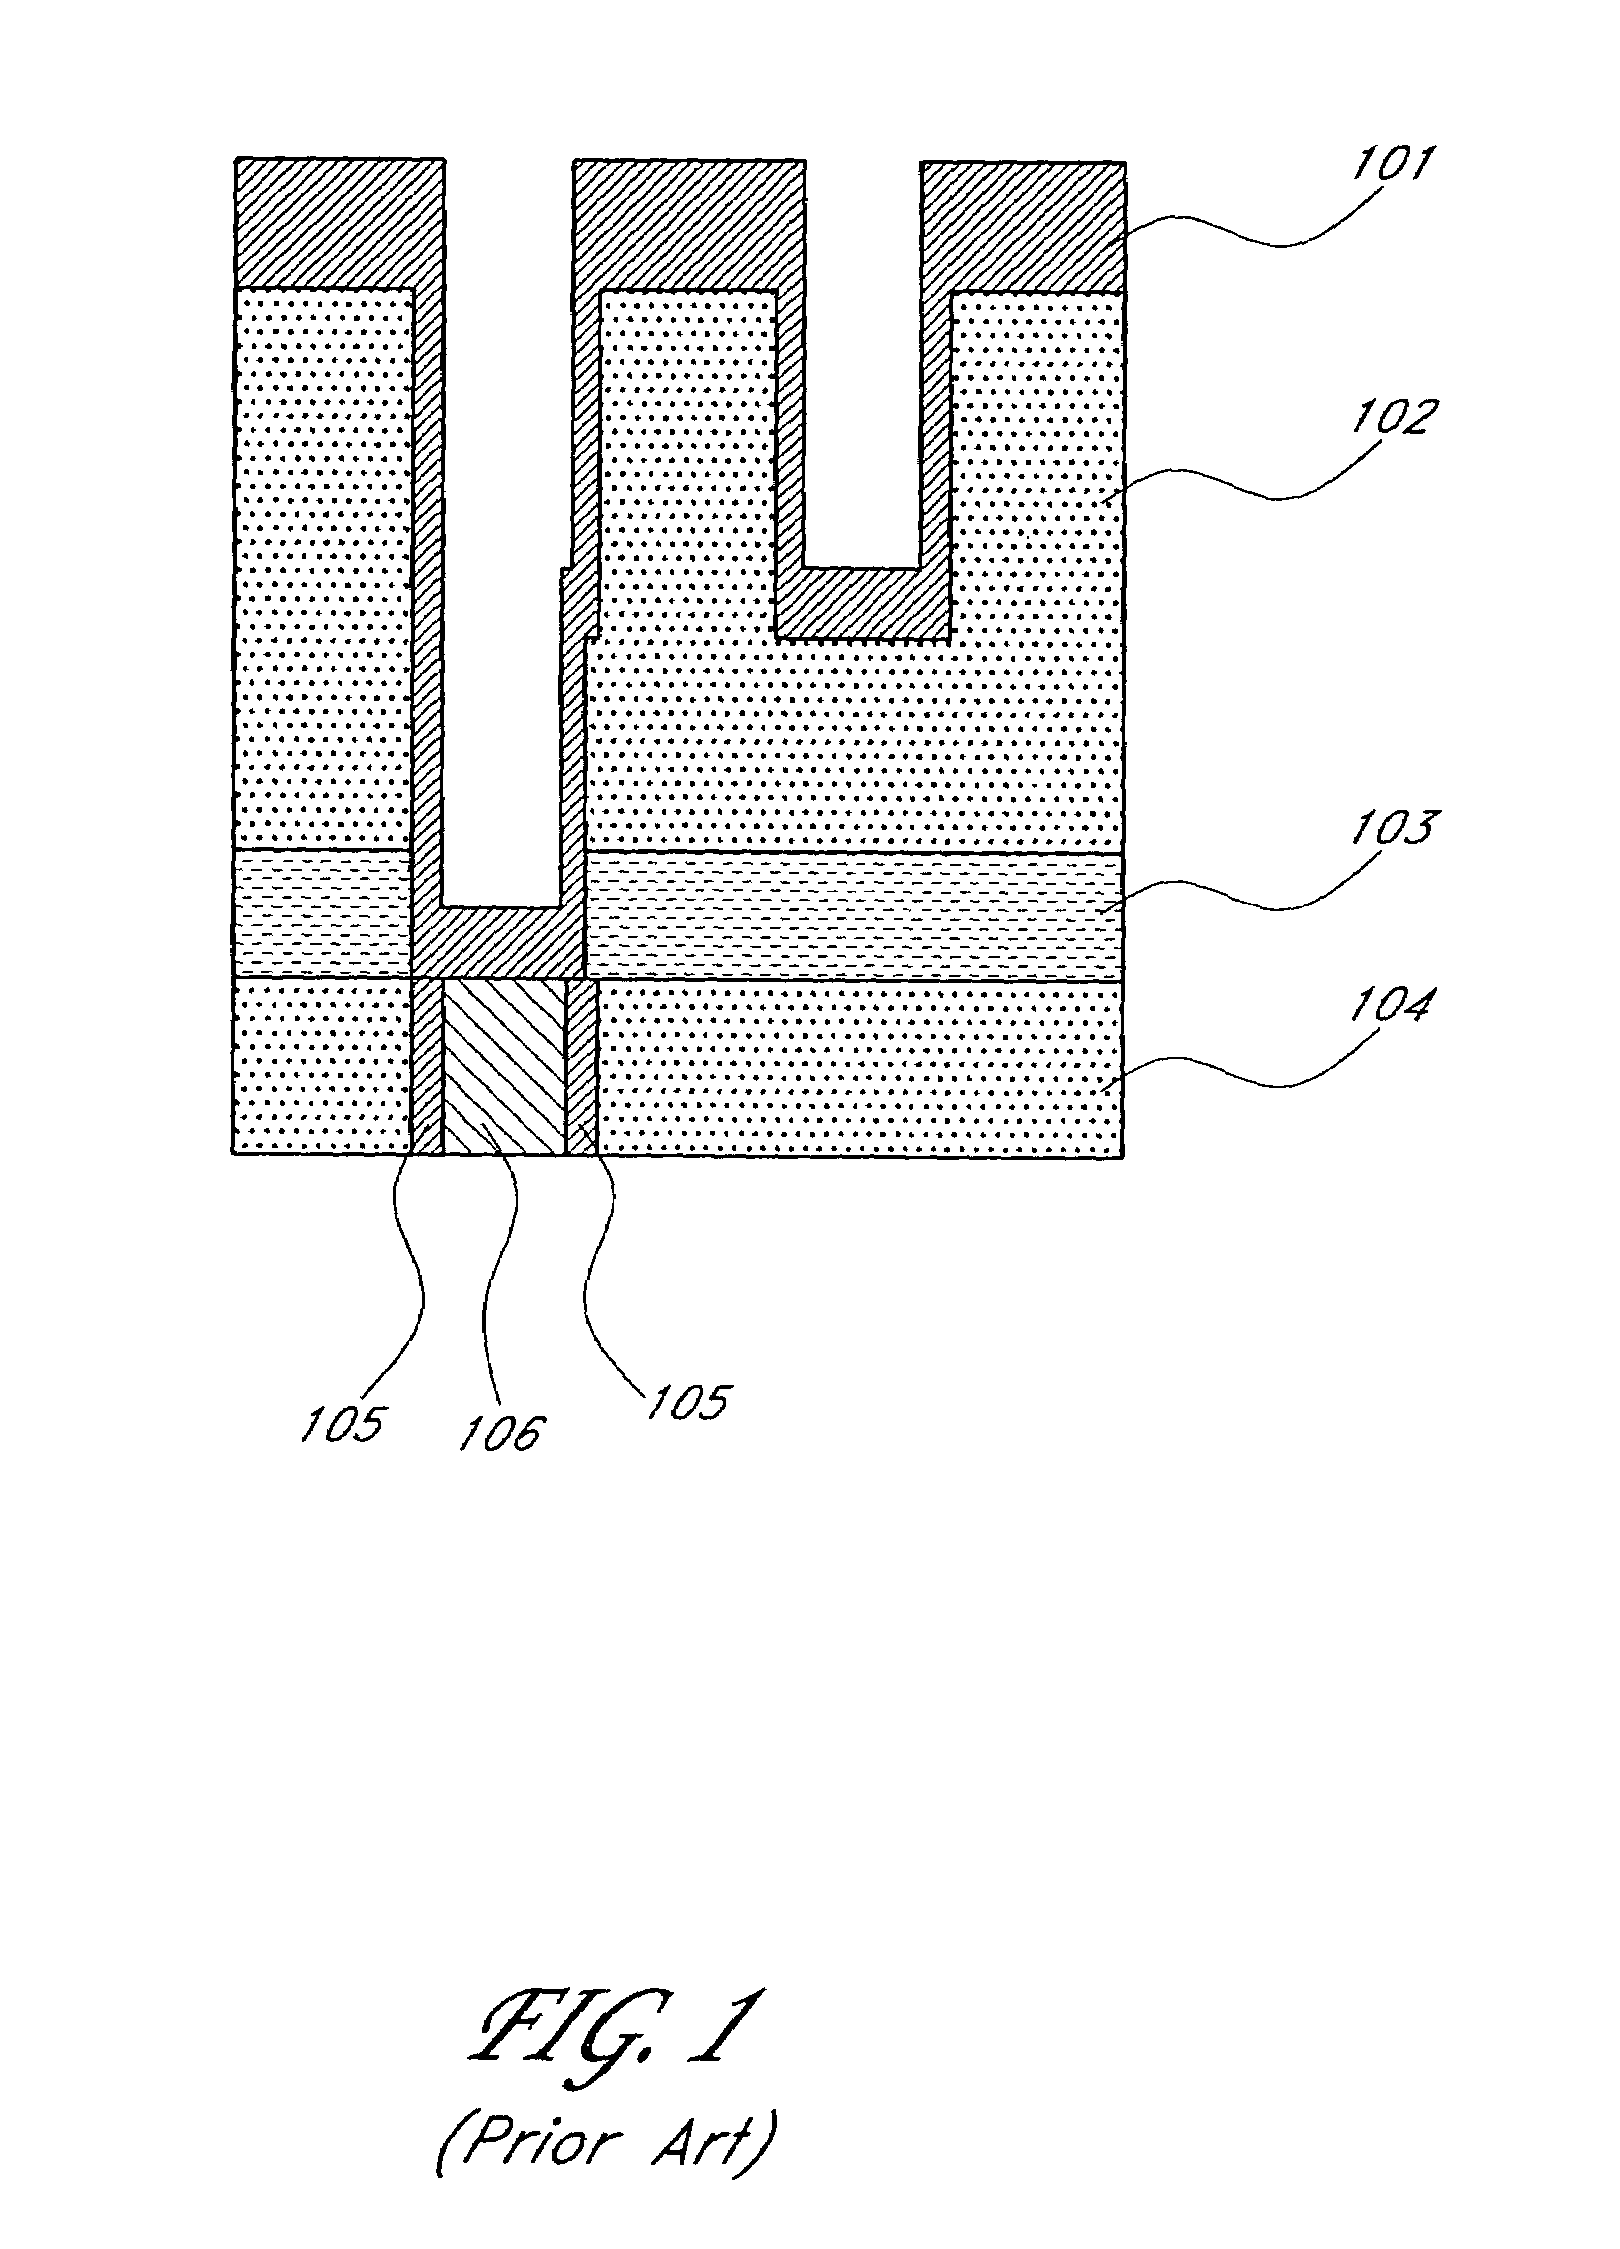 Selective formation of metal layers in an integrated circuit